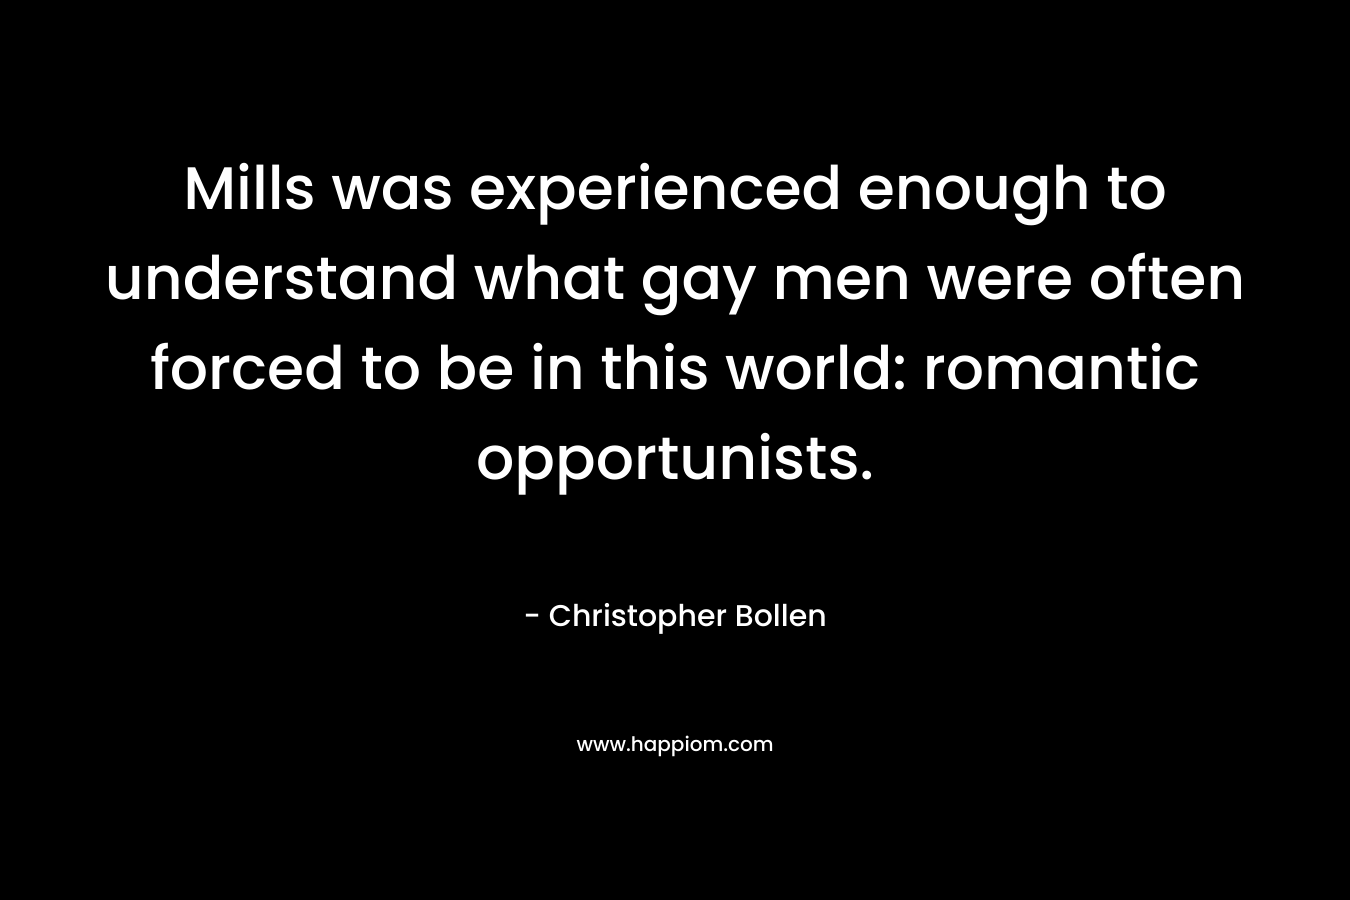 Mills was experienced enough to understand what gay men were often forced to be in this world: romantic opportunists. – Christopher Bollen